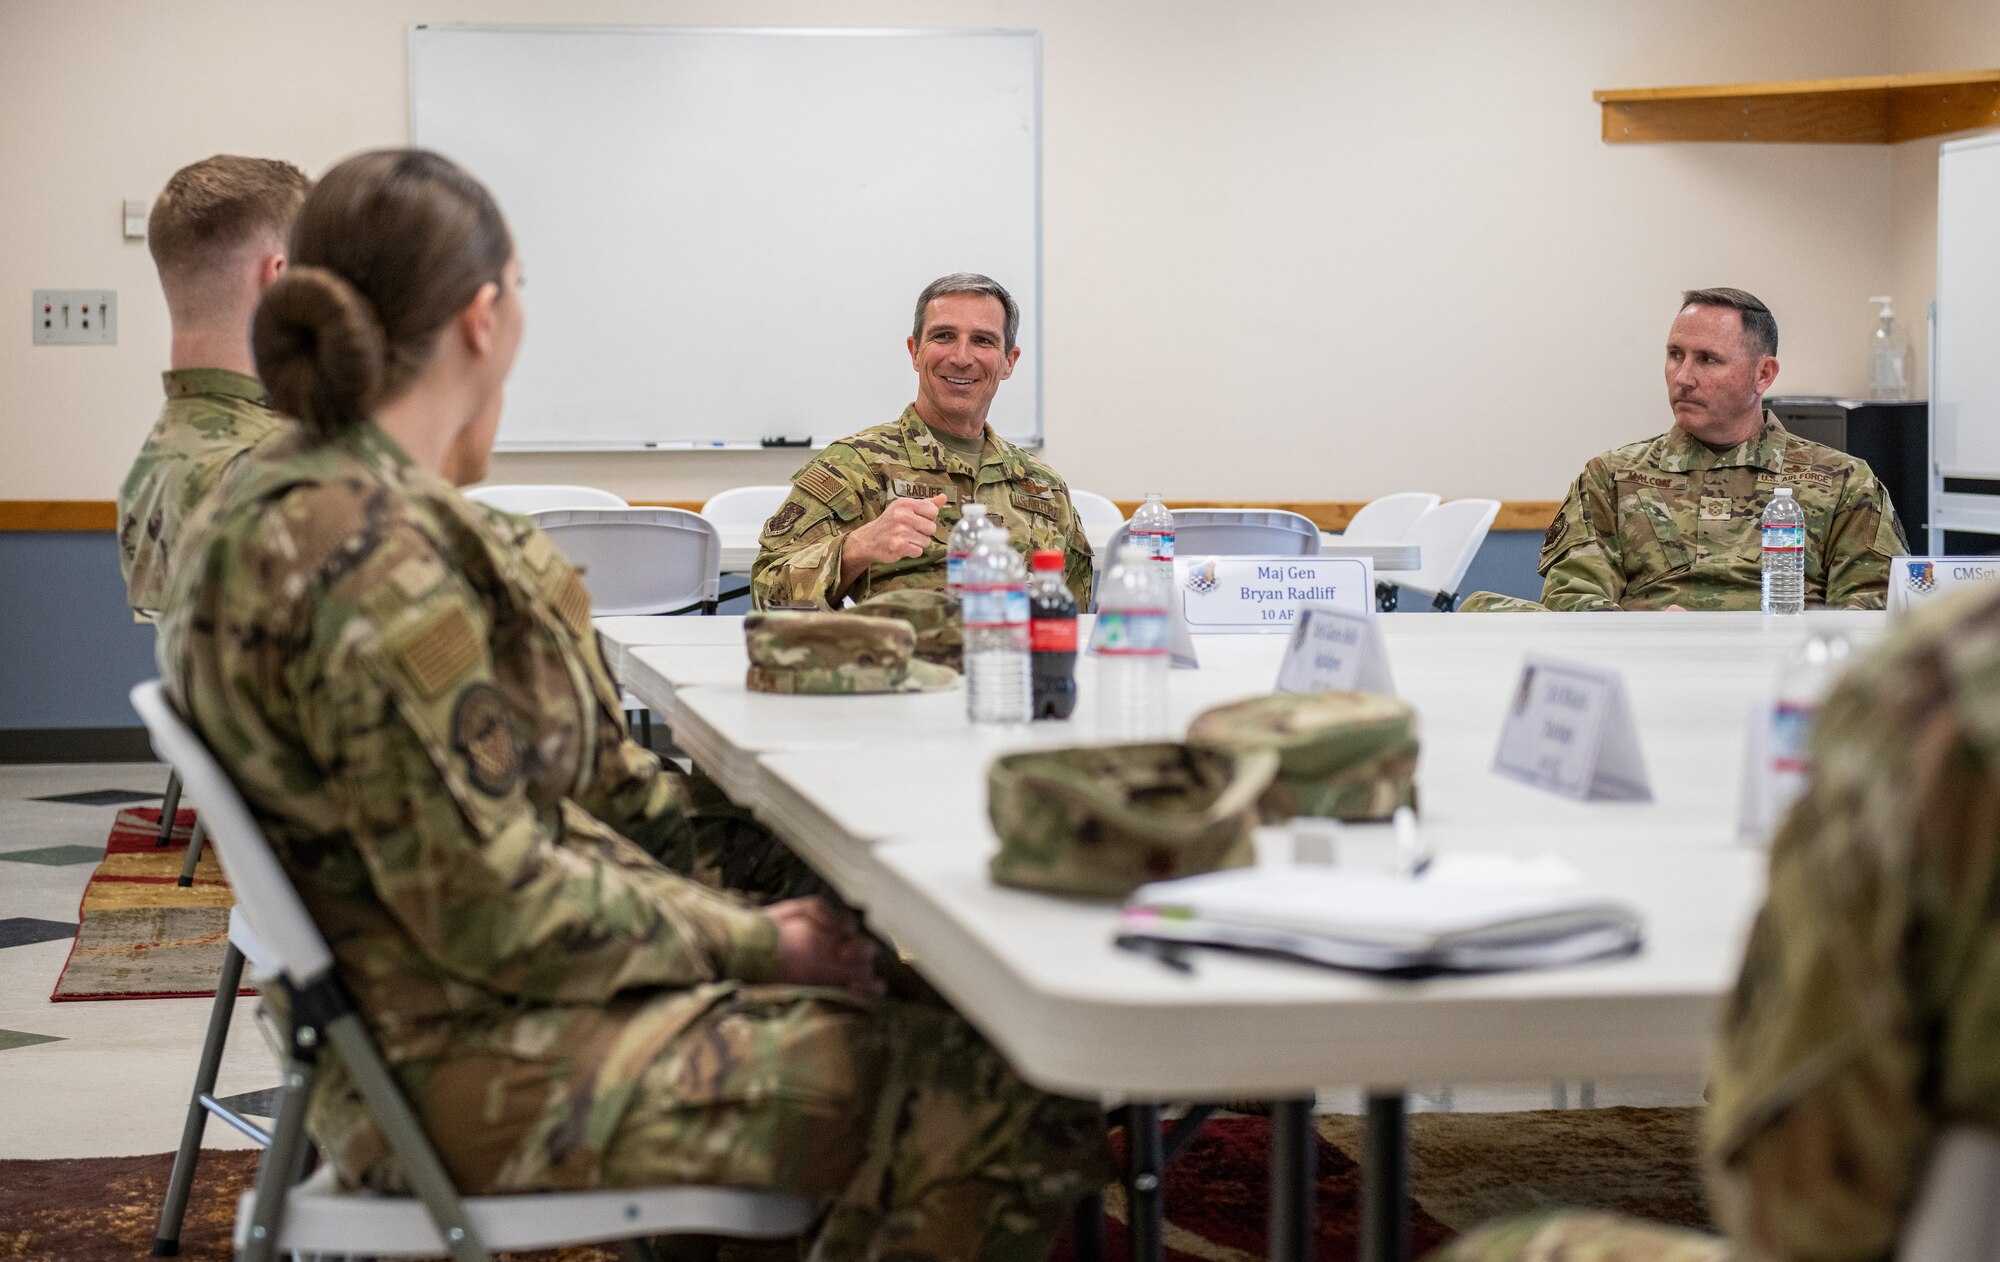 Maj. Gen. Bryan Radliff, 10th Air Force commander, and Chief Master Sgt. Jeremy Malcom, 10th AF command chief, host a luncheon with Airmen from the 419th Fighter Wing